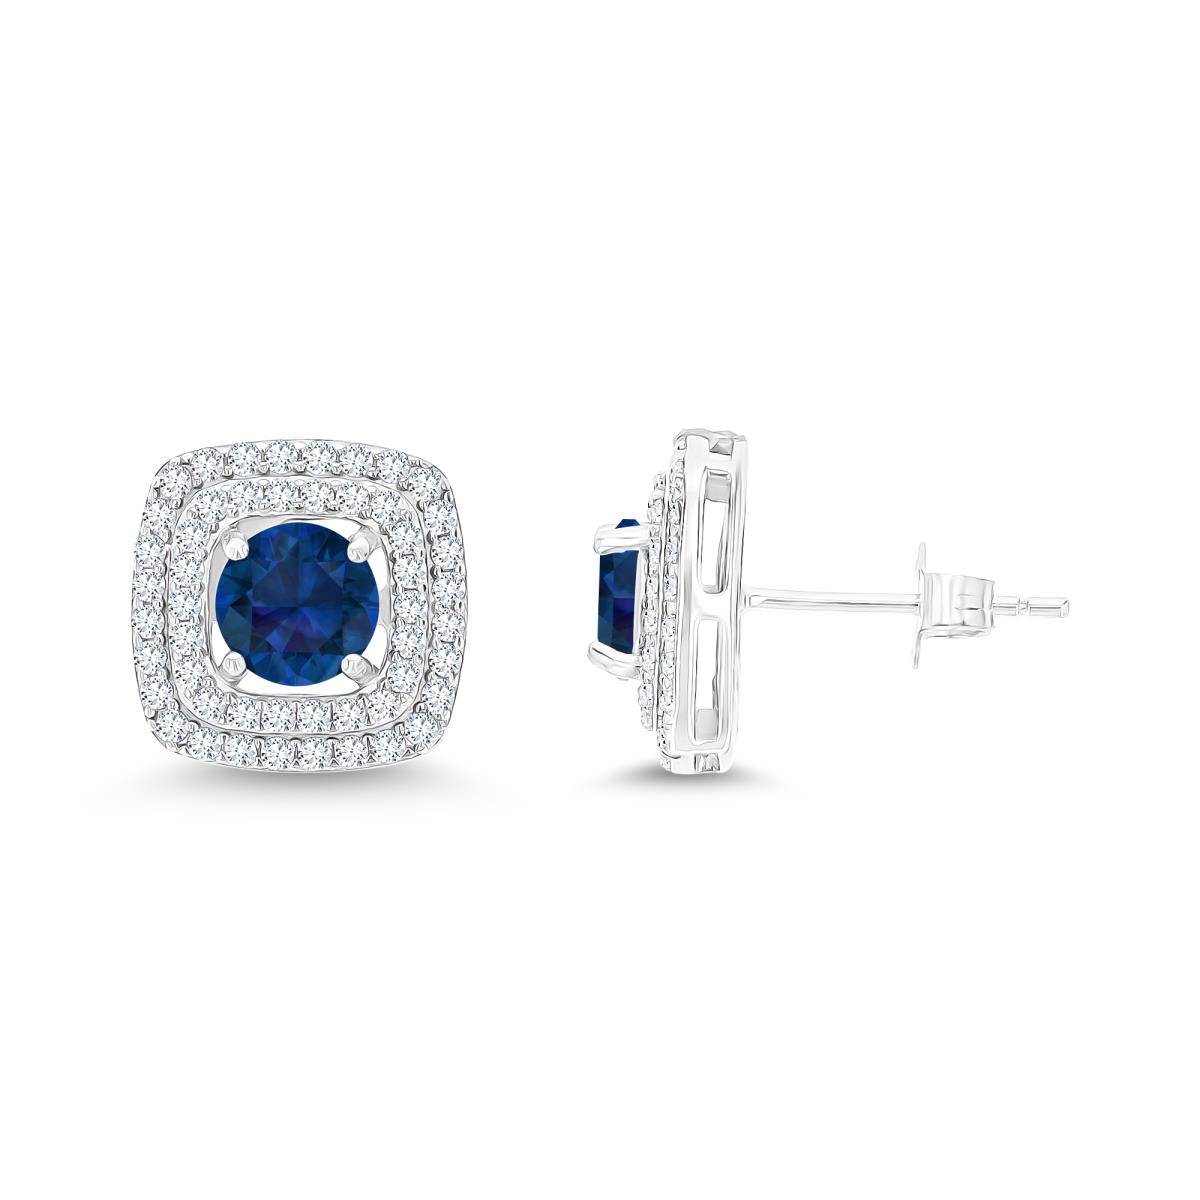 Sterling Silver Rhodium 6mm RD Cr Blue Sapphire/ Cr White Sapphire Cushion Double Halo Stud Earring